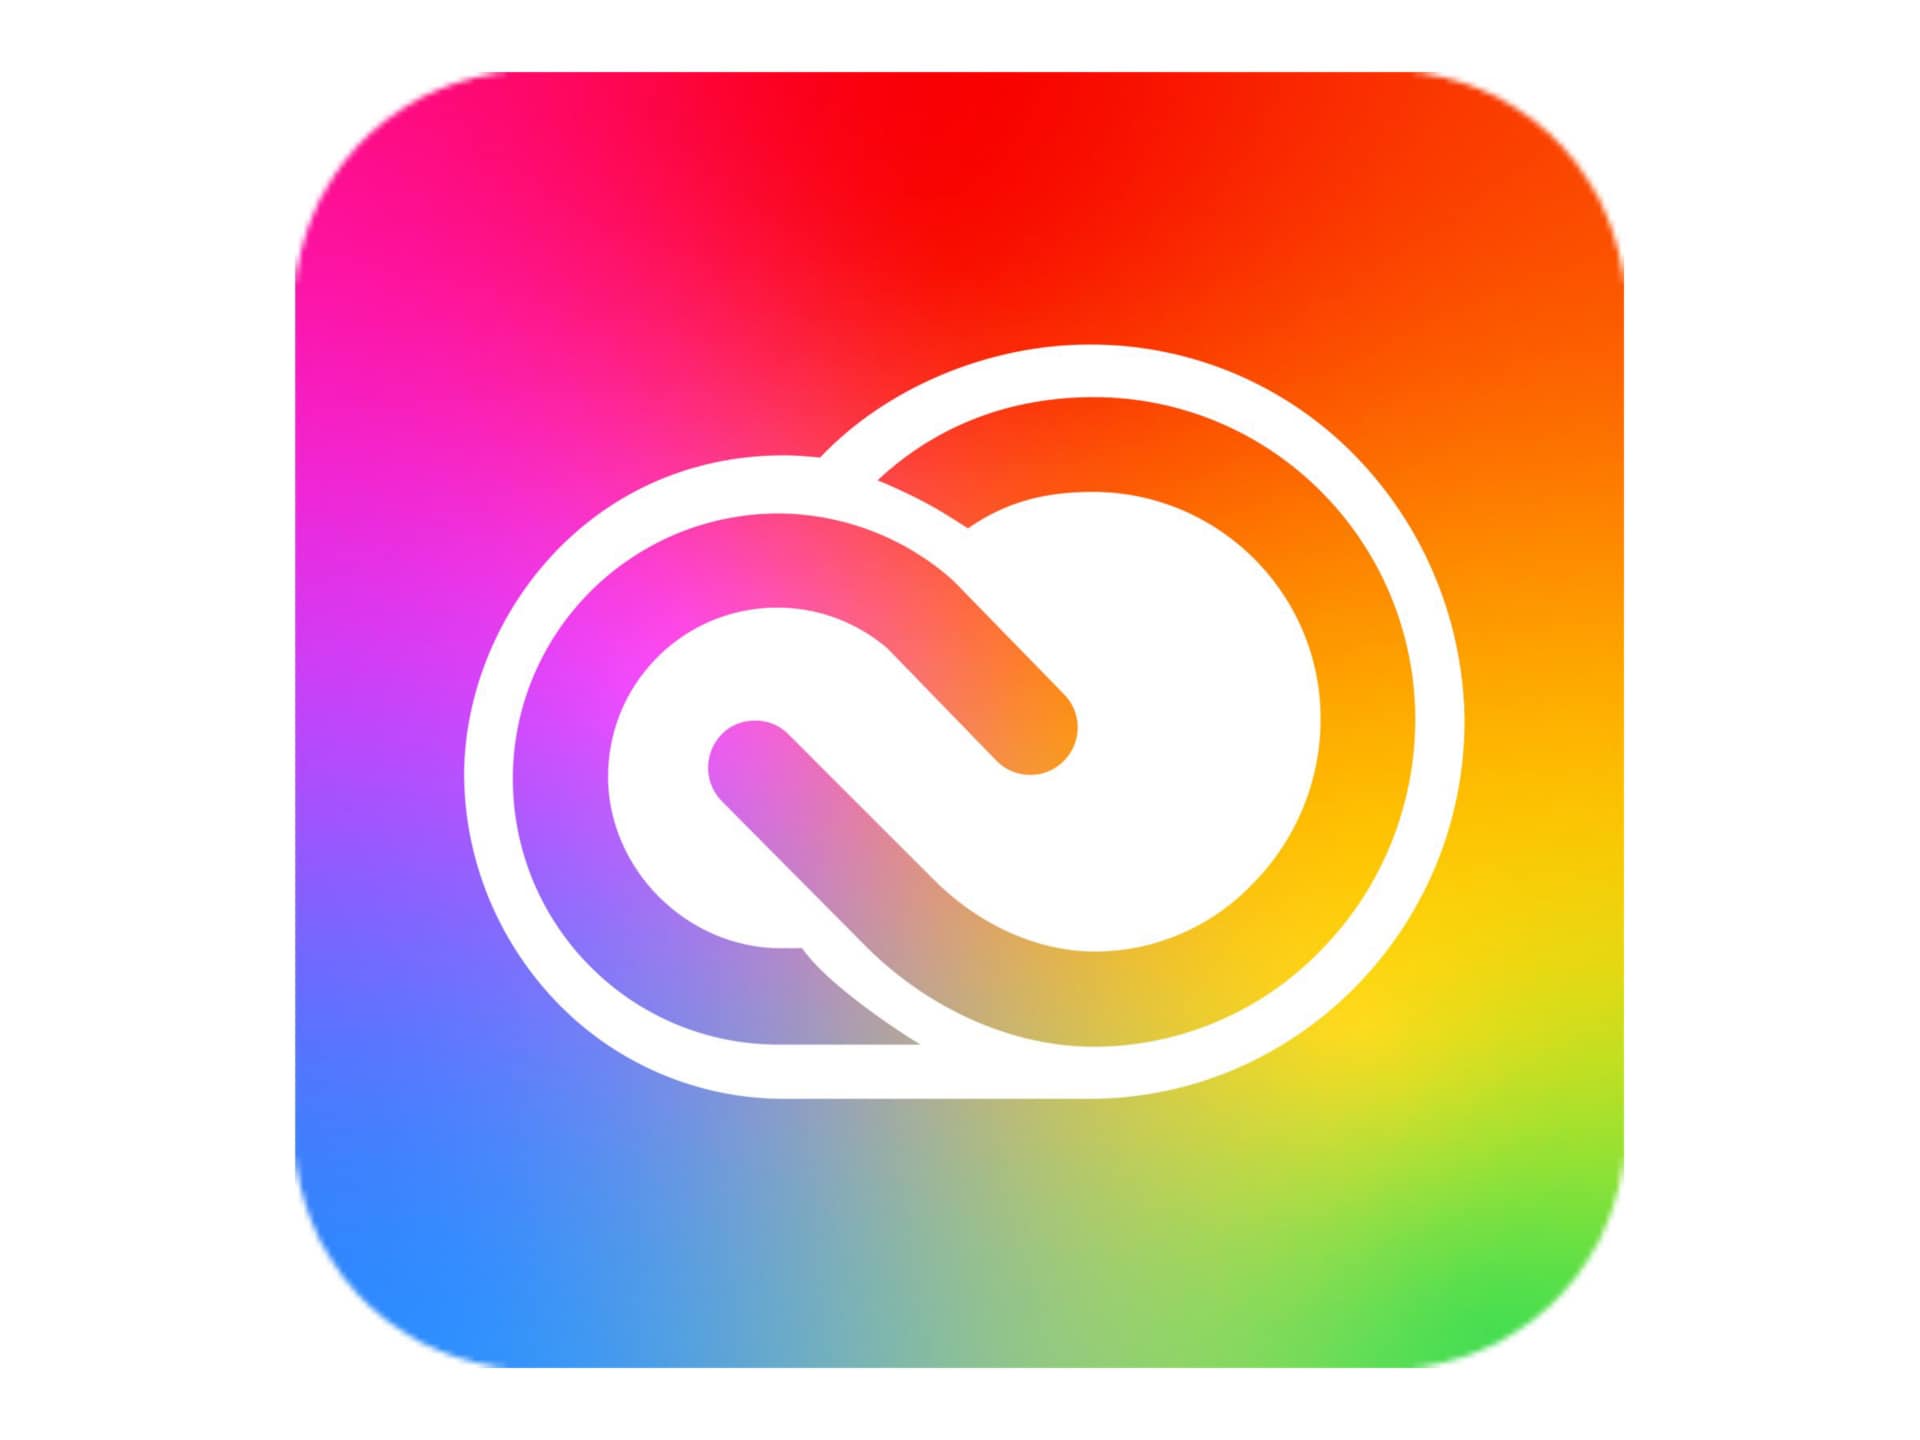 Adobe Creative Cloud All Apps - Pro for teams - Subscription Renewal - 1 us